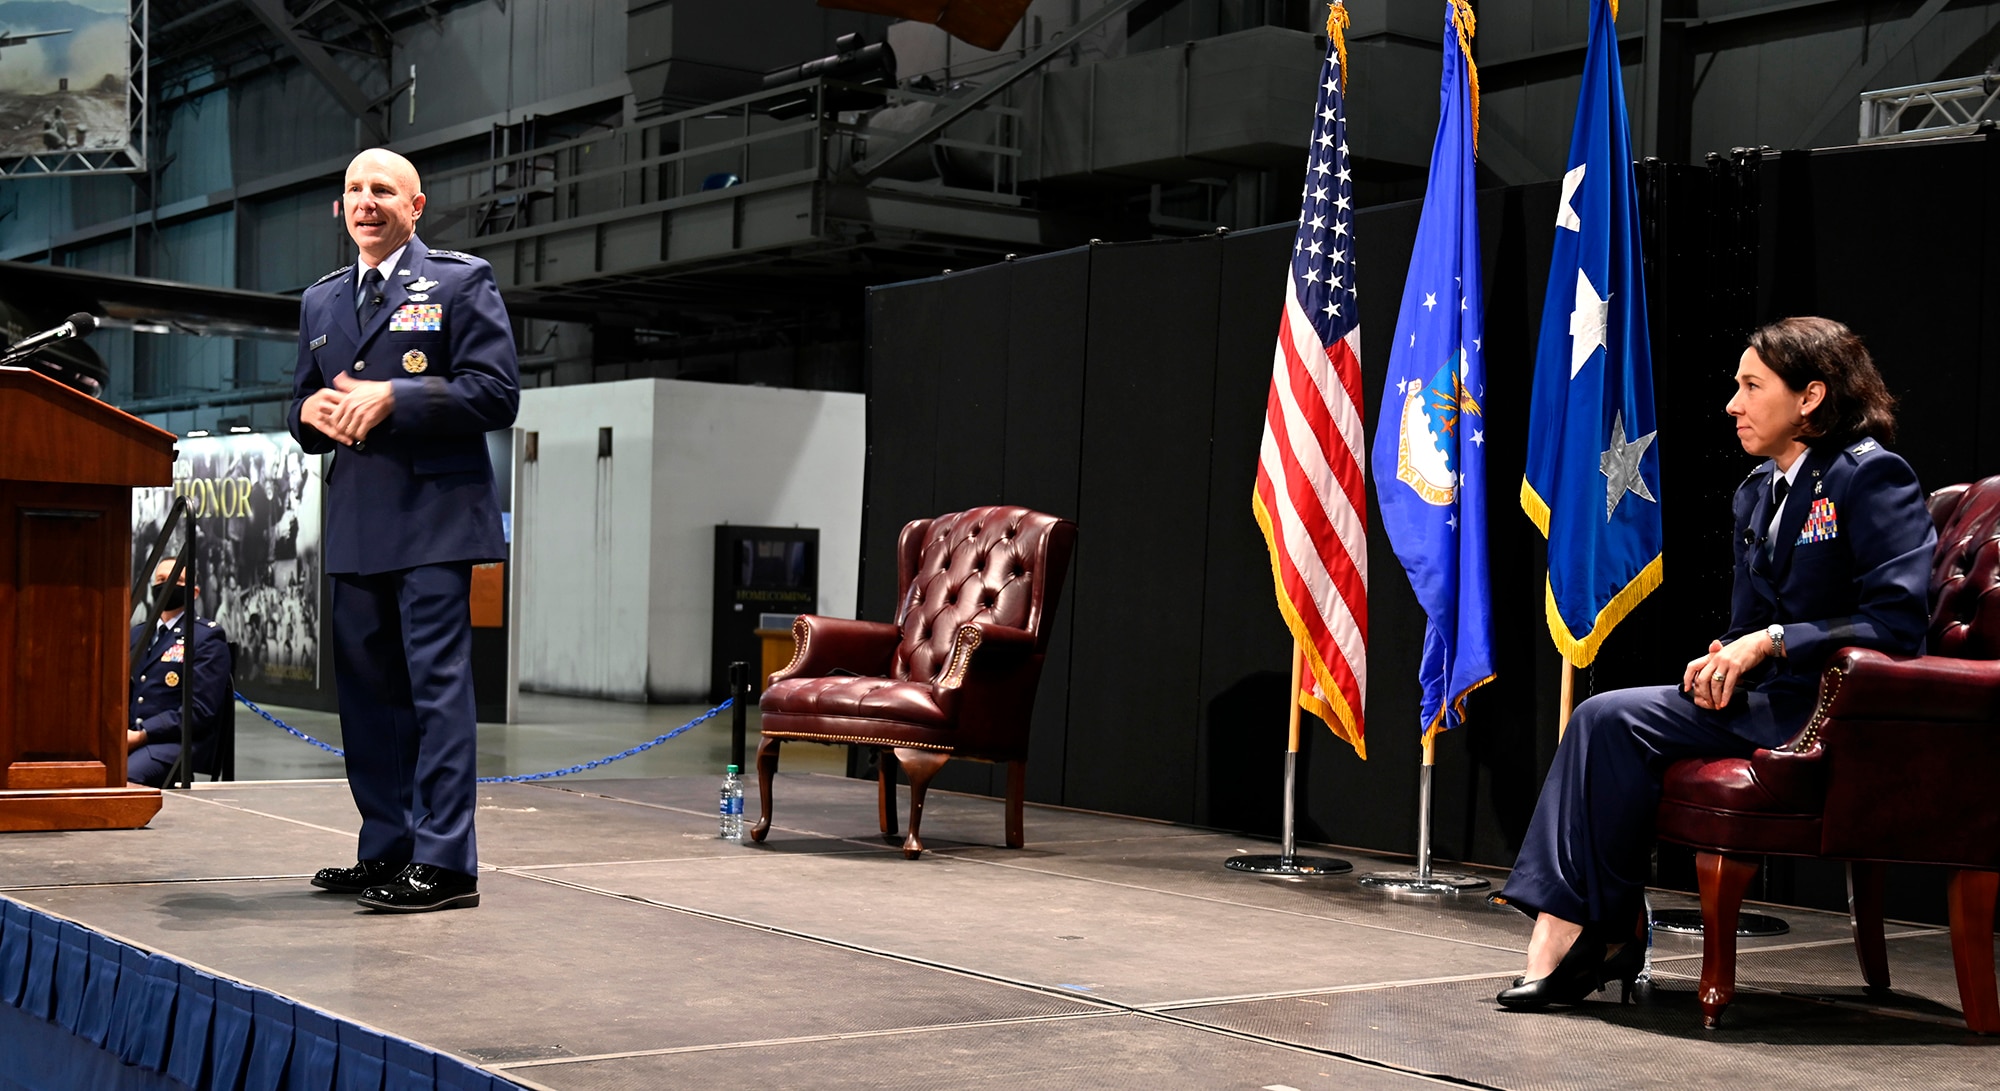 Lt. Gen. Carl Schaefer, Air Force Materiel Command Deputy Commander, speaks to the audience about the career and attributes of Col. Jeannine Ryder, Air Force Materiel Command Surgeon General, prior to her promotion to general officer Aug. 3 at the National Museum of the United States Air Force, Wright-Patterson Air Force Base, Ohio. (photo by Darrius Parker)